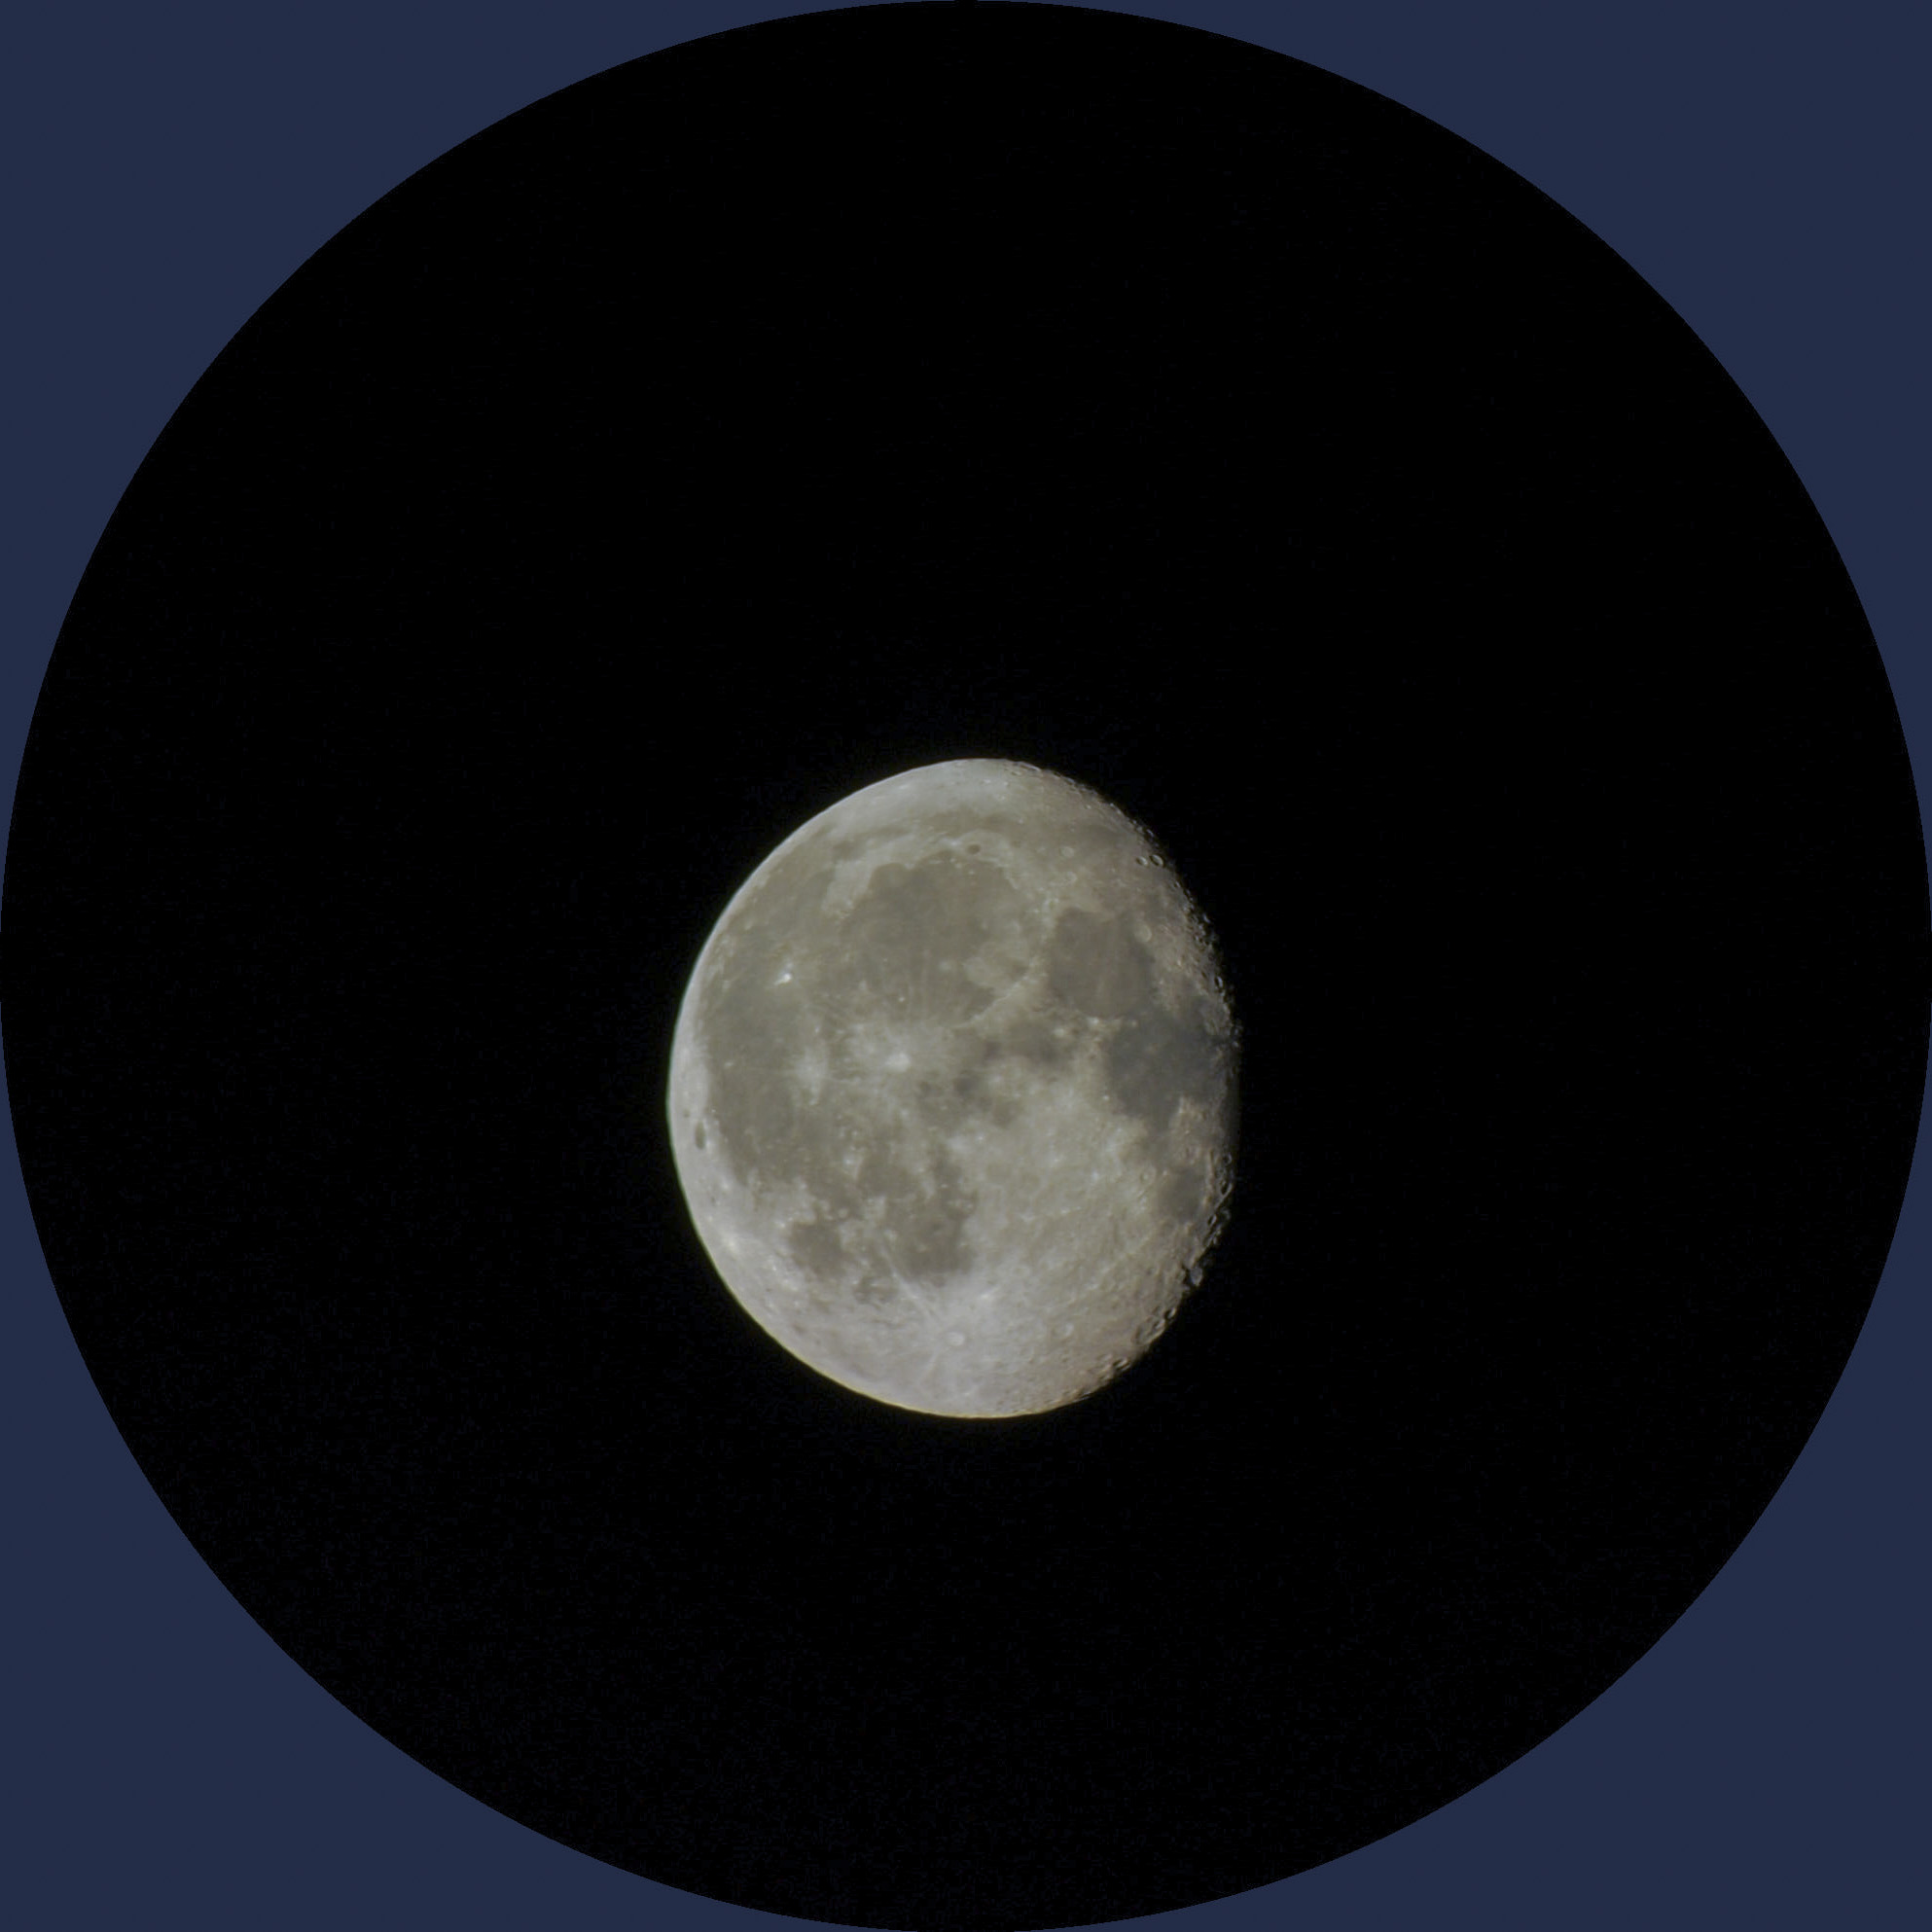 Closeup photo of the full moon taken with the Vaonis Hestia telescope paired with Google Pixel 6